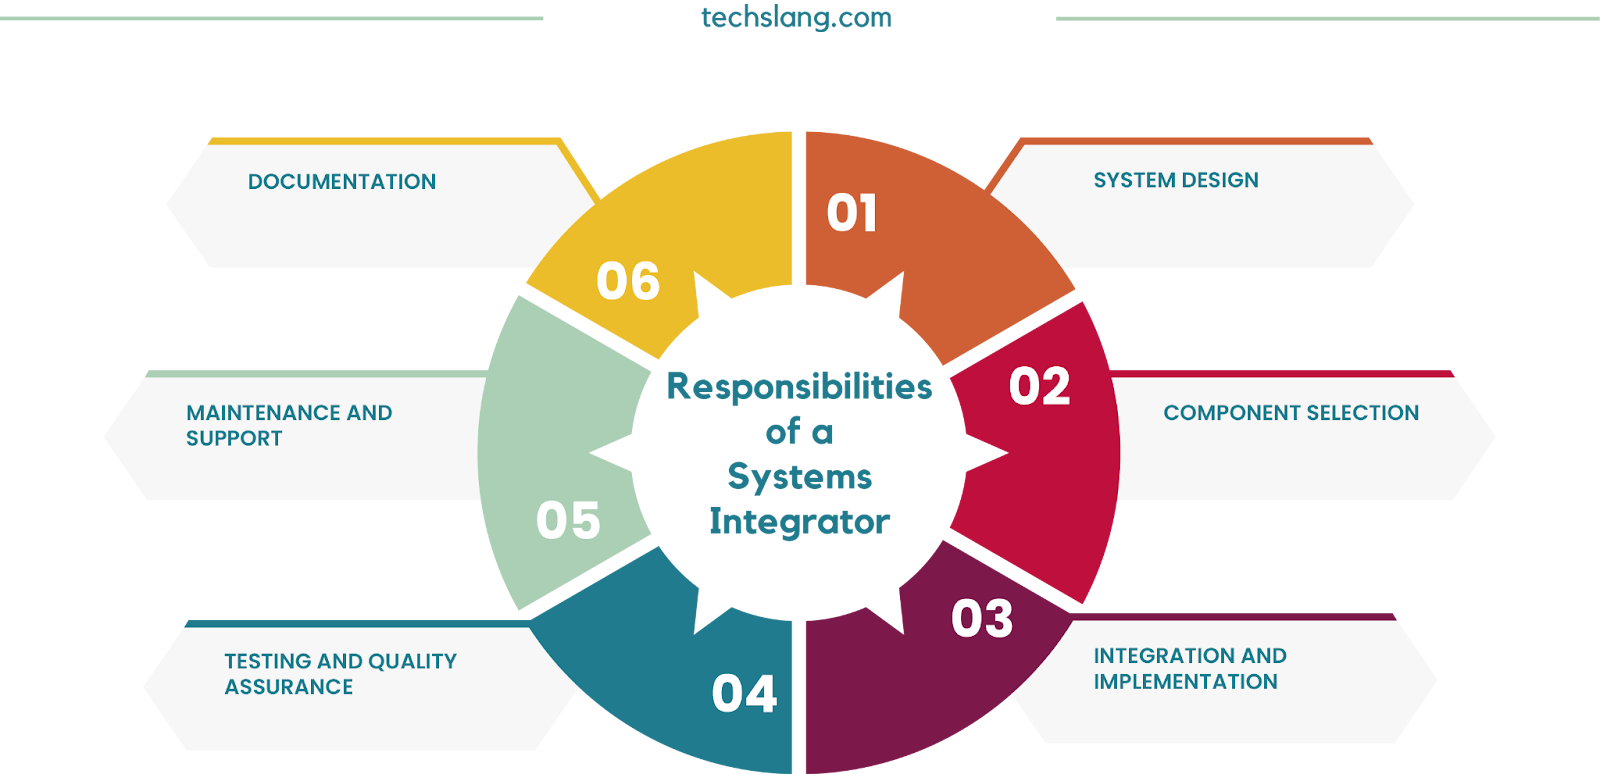 Responsibilities of a Systems Integrator